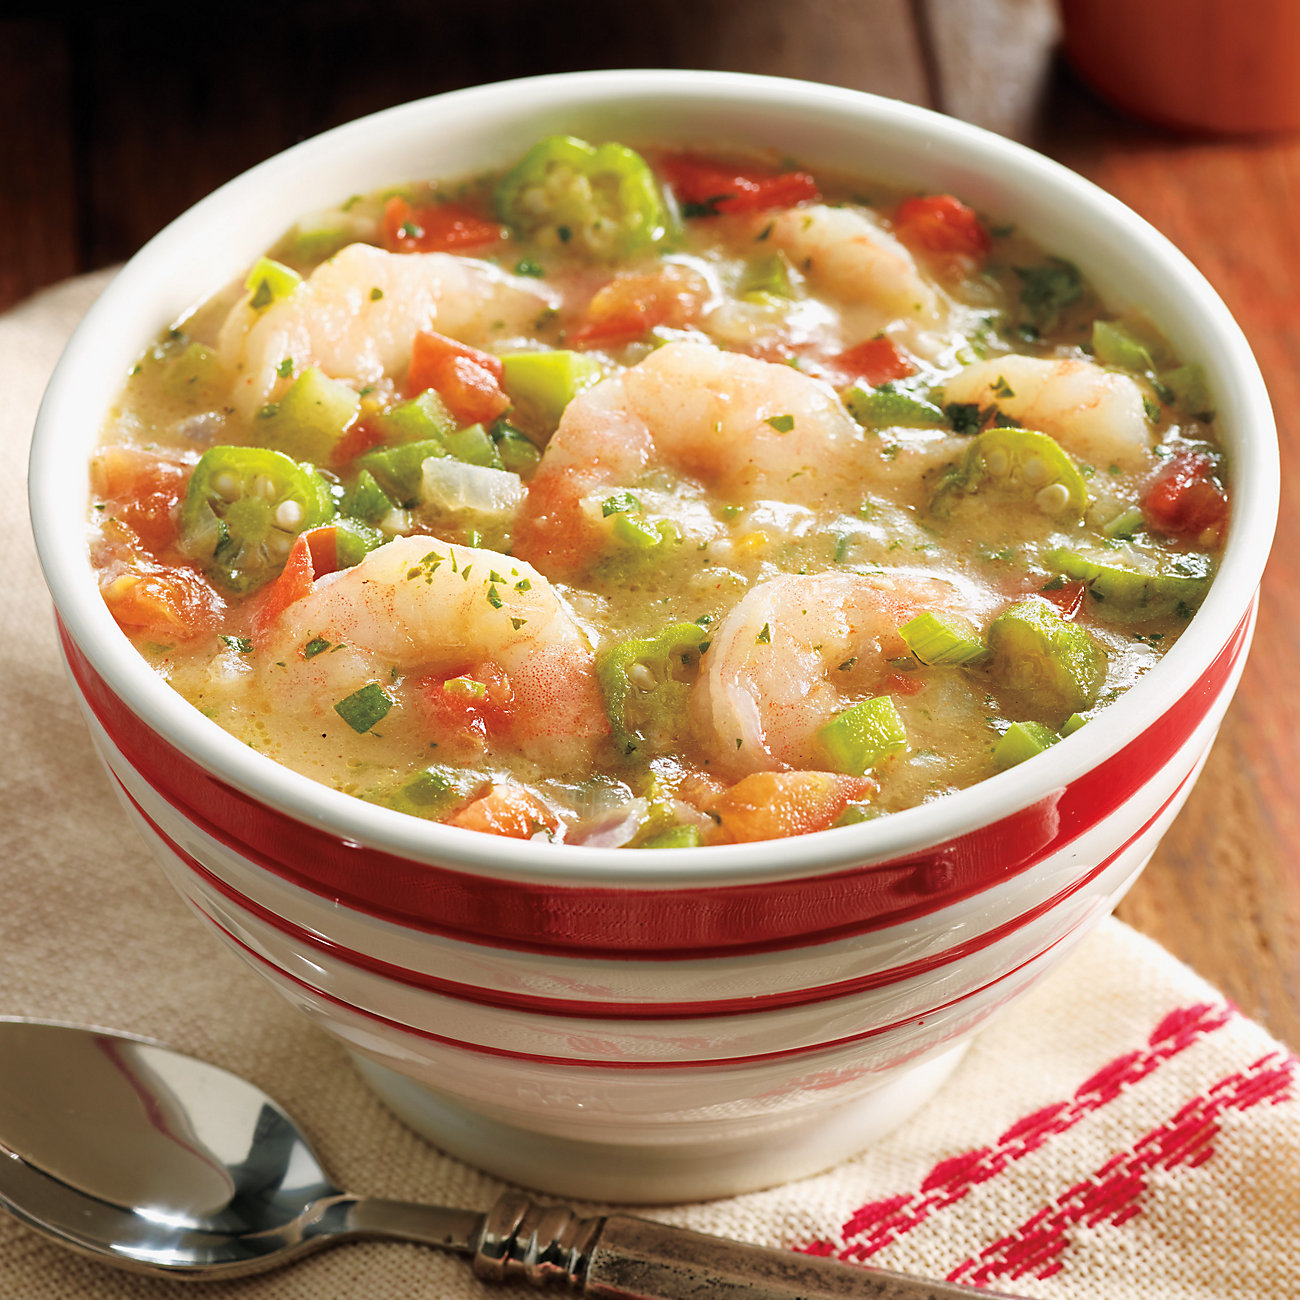 Southern Shrimp Gumbo Recipe from H-E-B